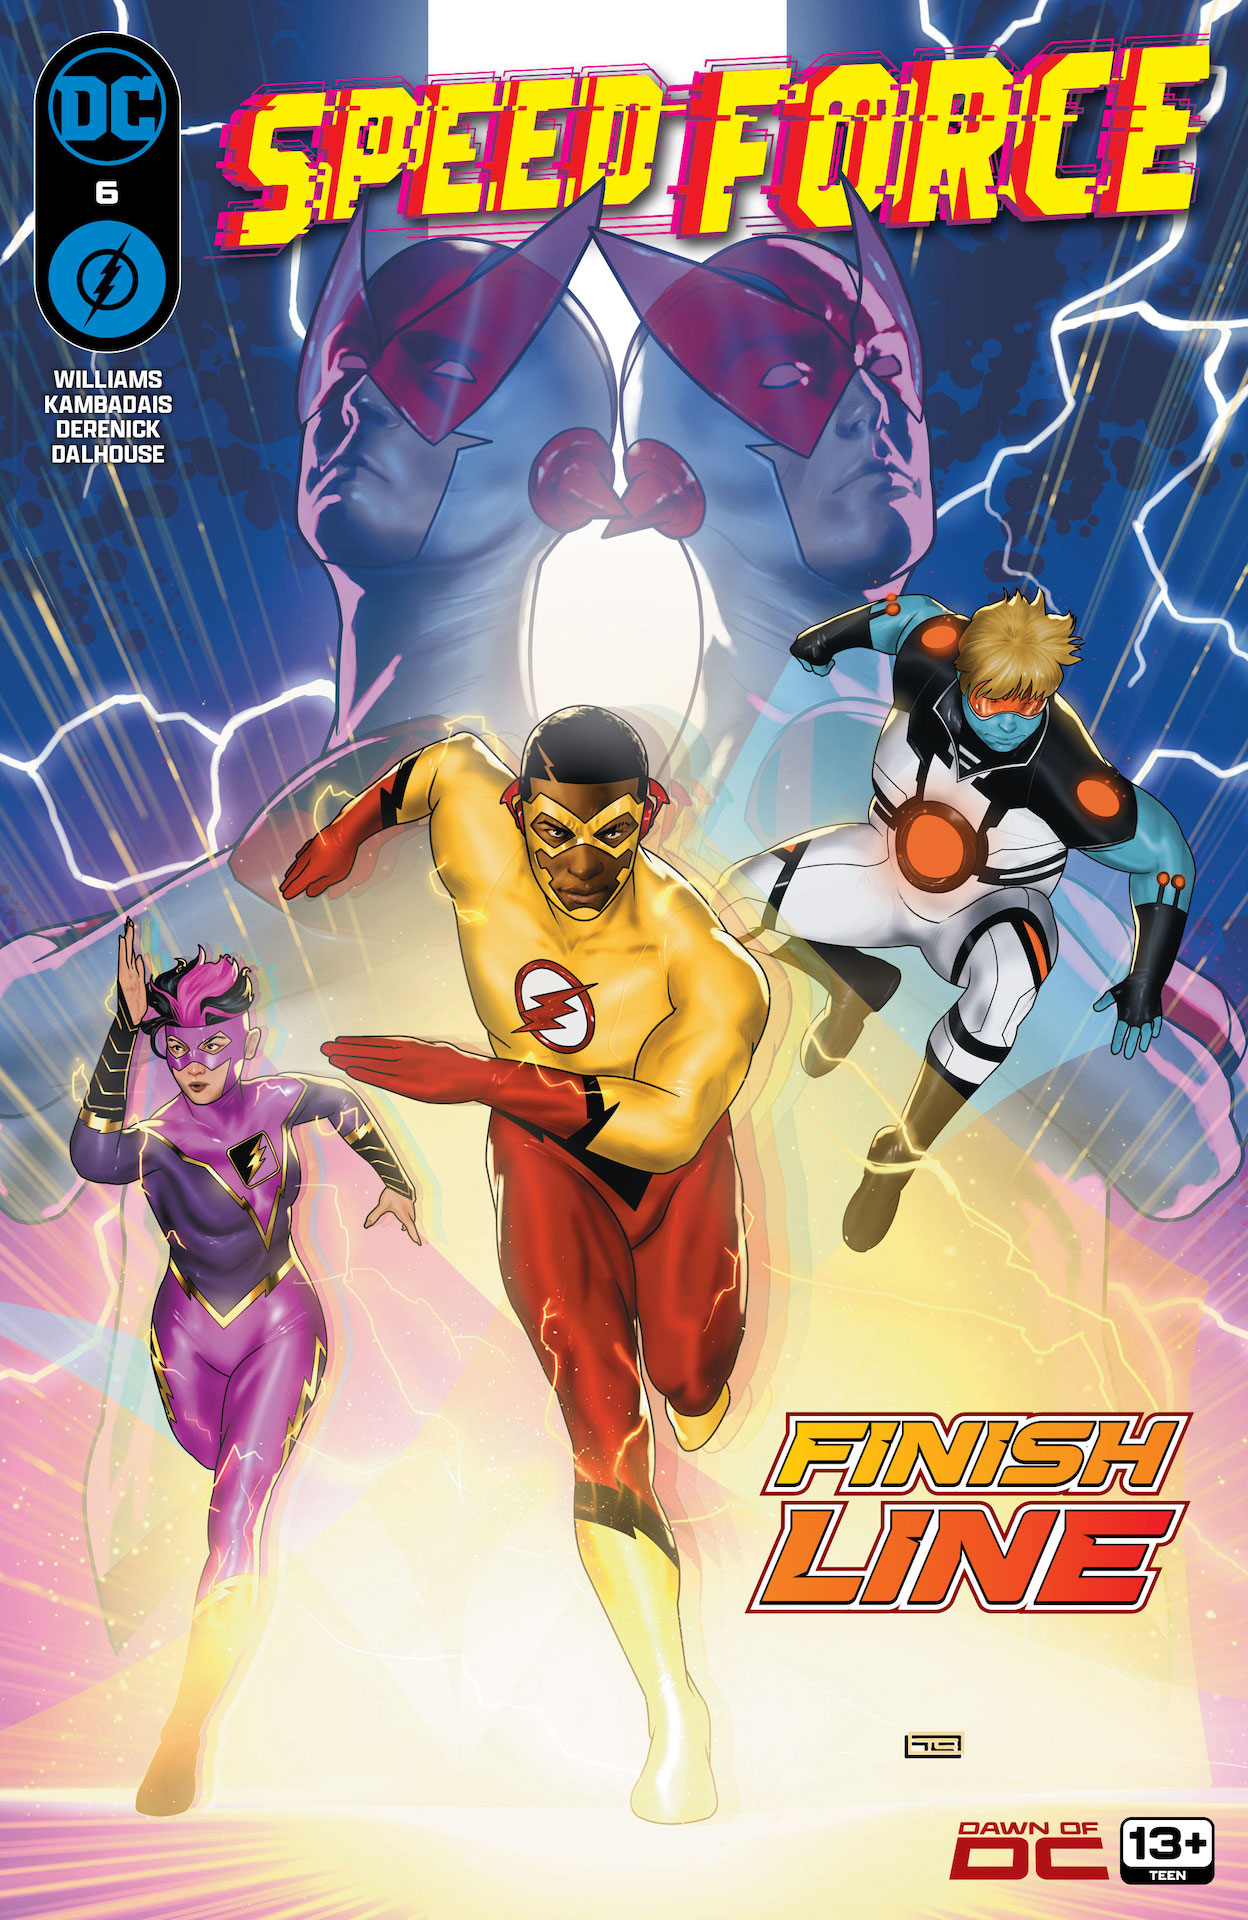 DC Preview: Speed Force #6